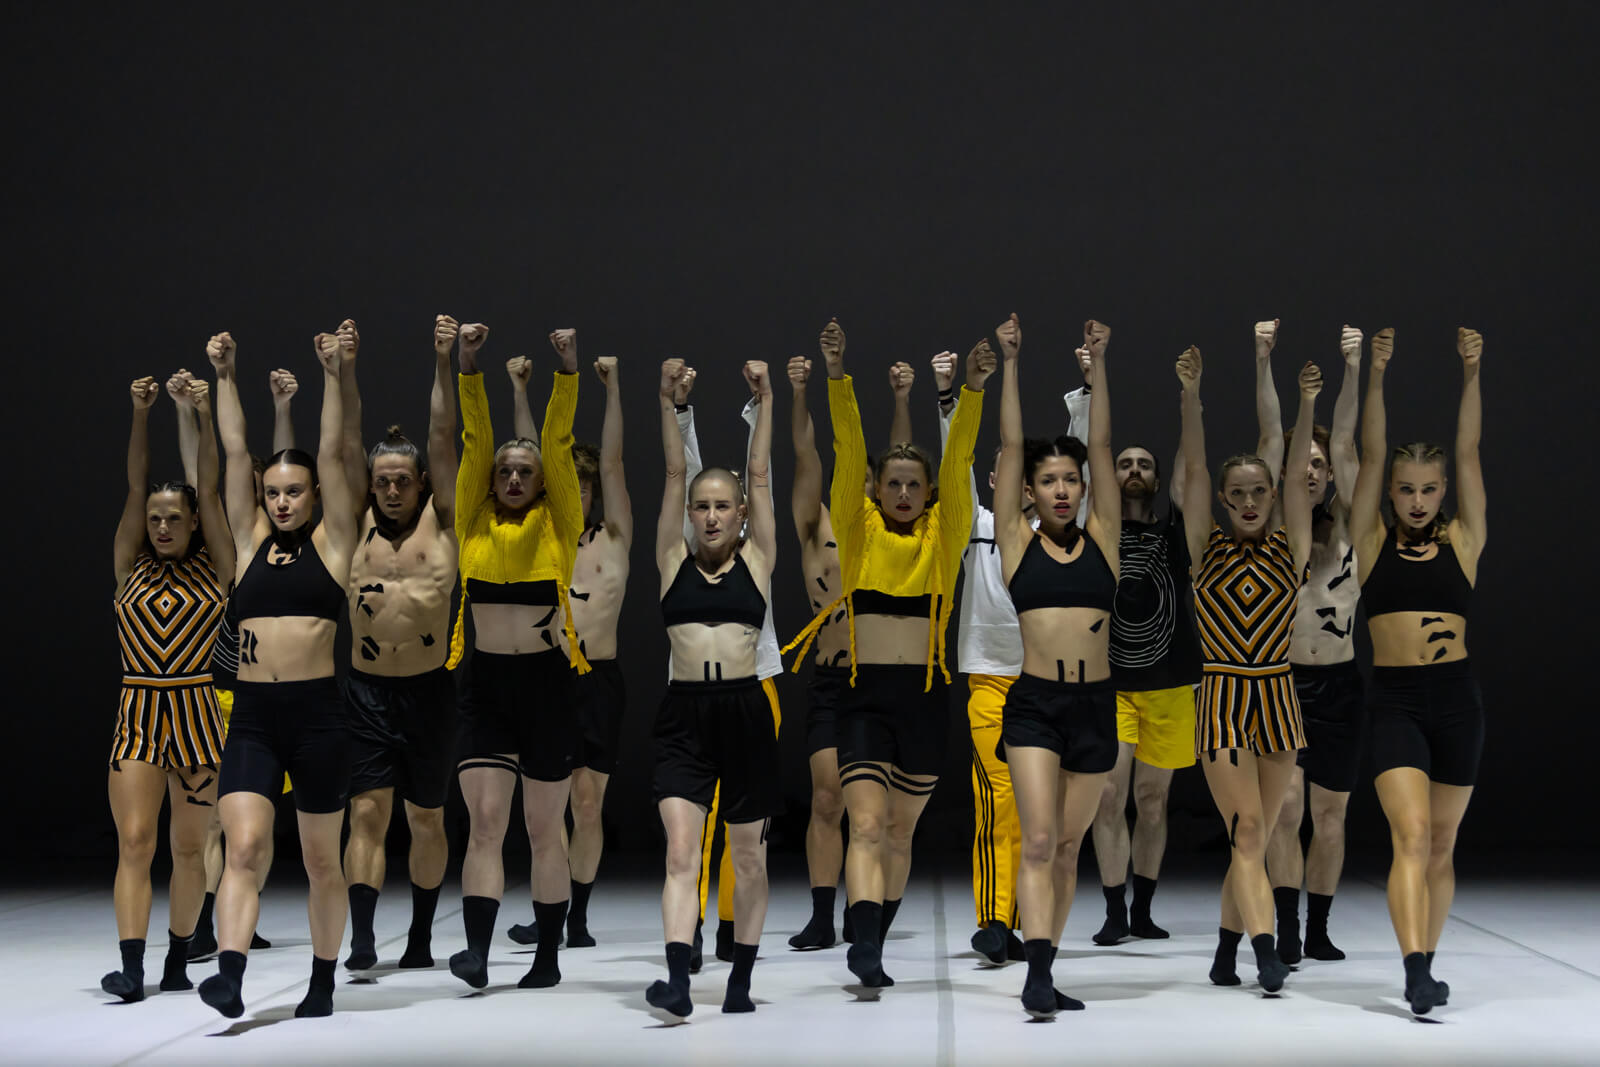 A group of 16 dancers, in two rows of 8 march towards the audience, their hands clenched into fists, their arms punching straight up into the air.